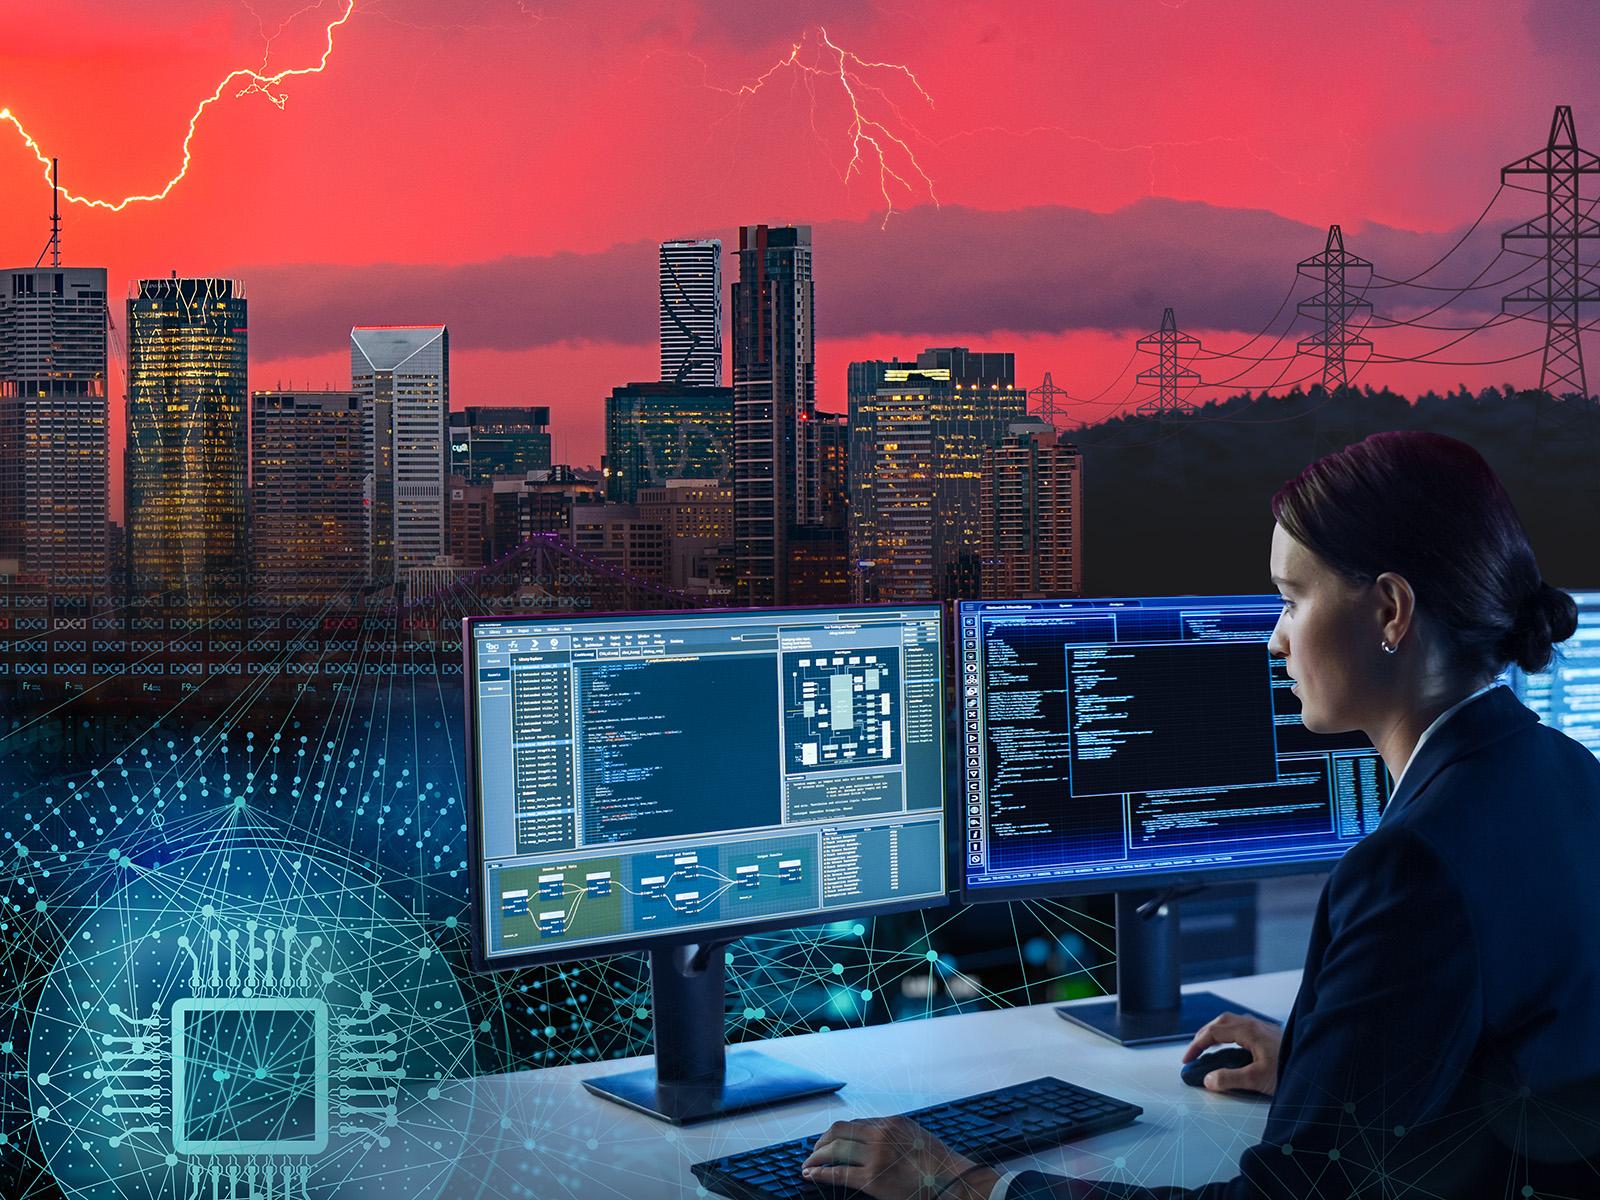 Composite image depicting a red-toned stormy city skyline, powerlines, and woman sitting at computer screens